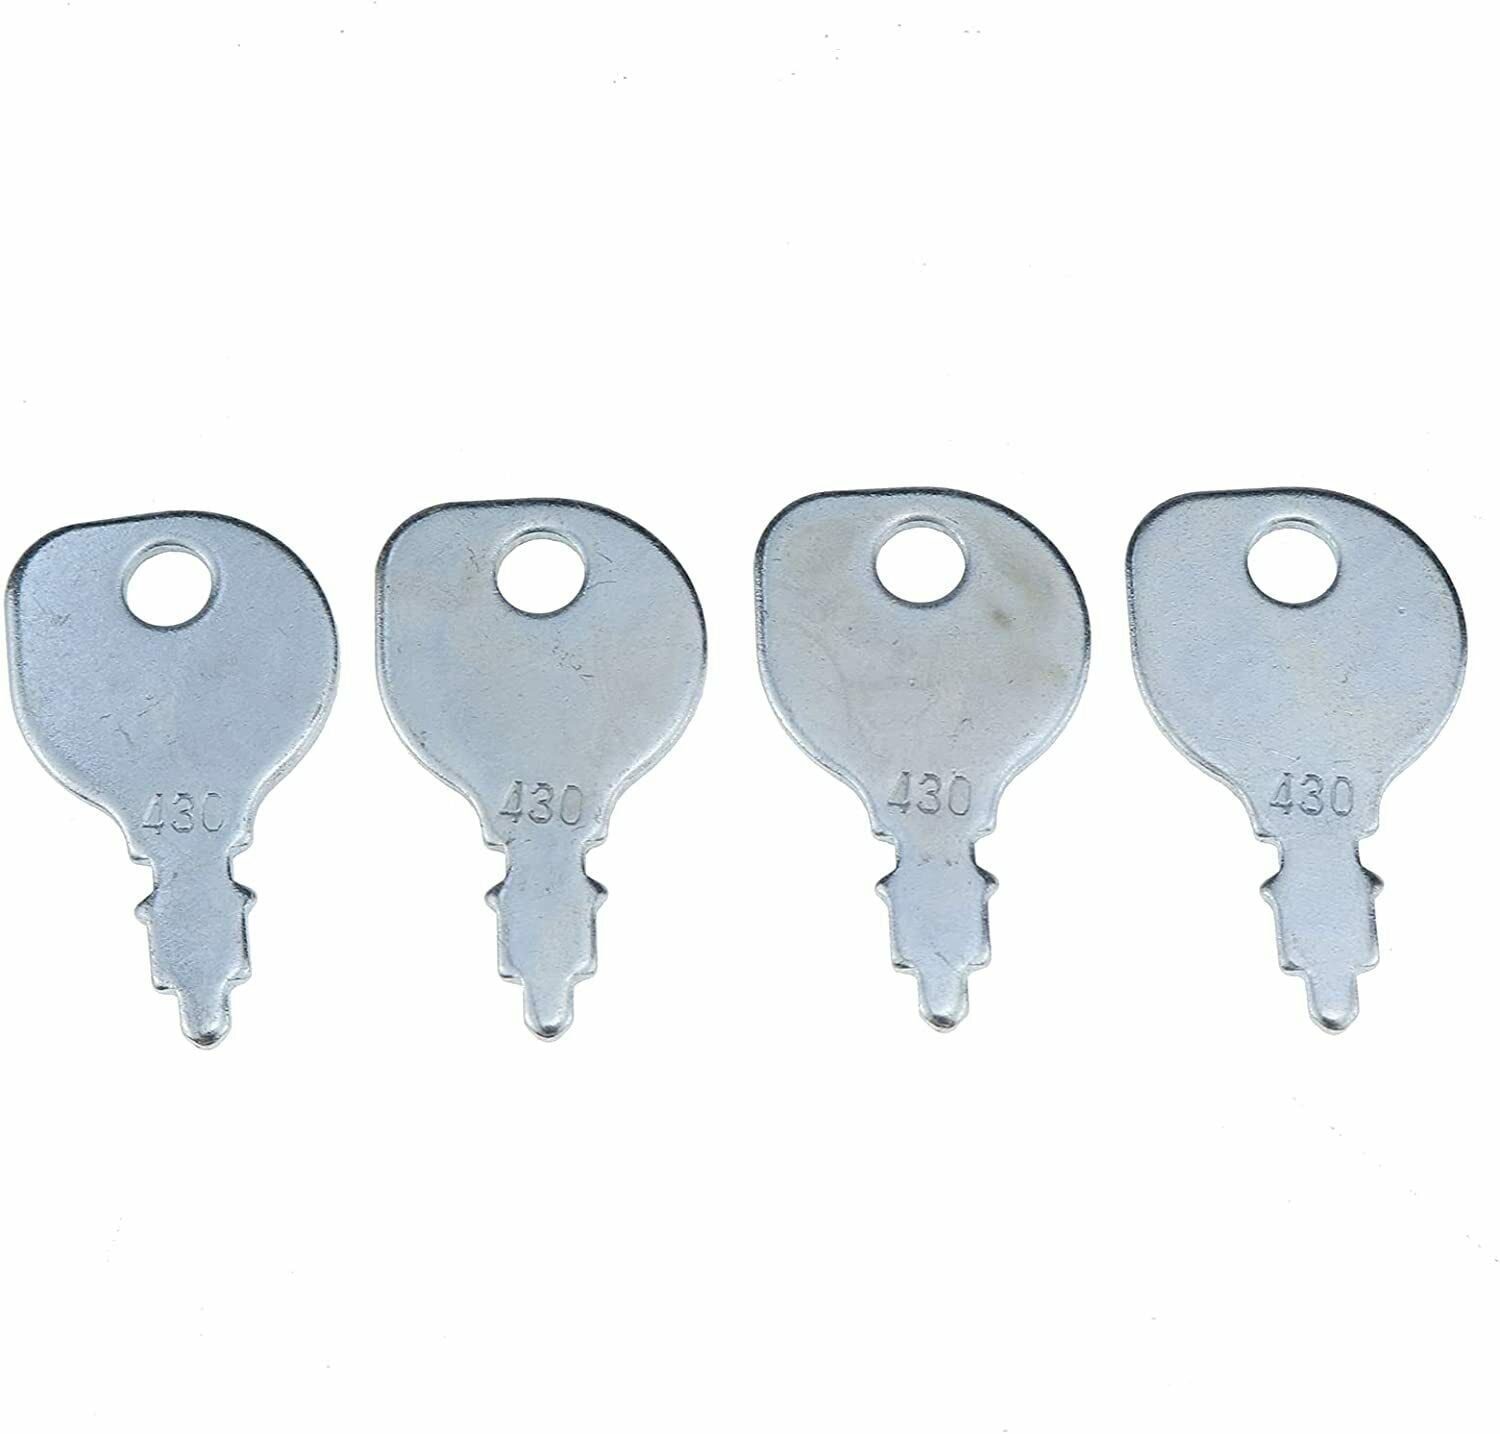 Set of 2 Fits Most Lawnmowers for sale online Replacement Indak Ignition Key Rotary 2932 Lock 